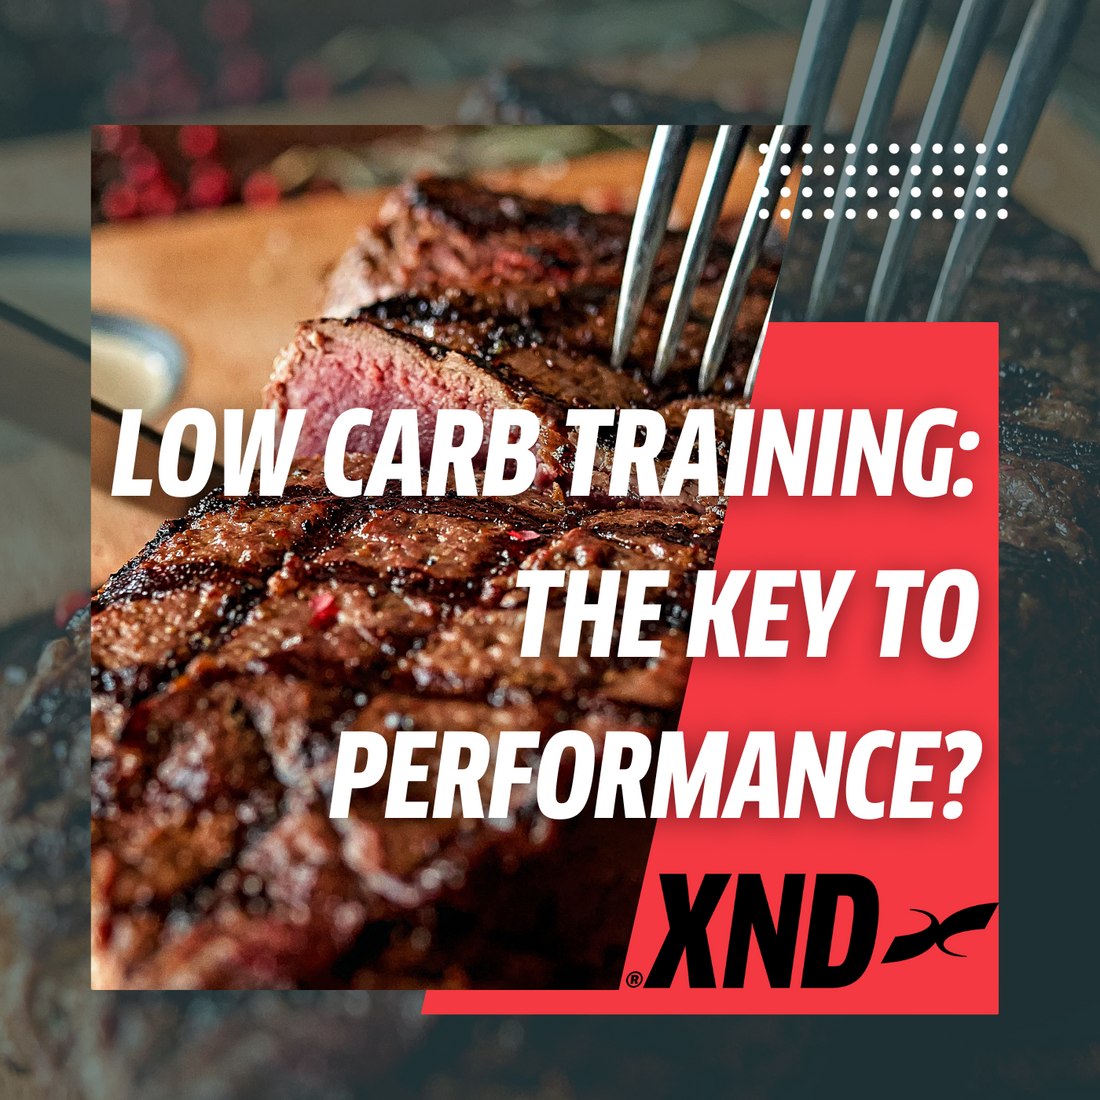 Low Carb training / Training Fasted: Key to endurance performance?